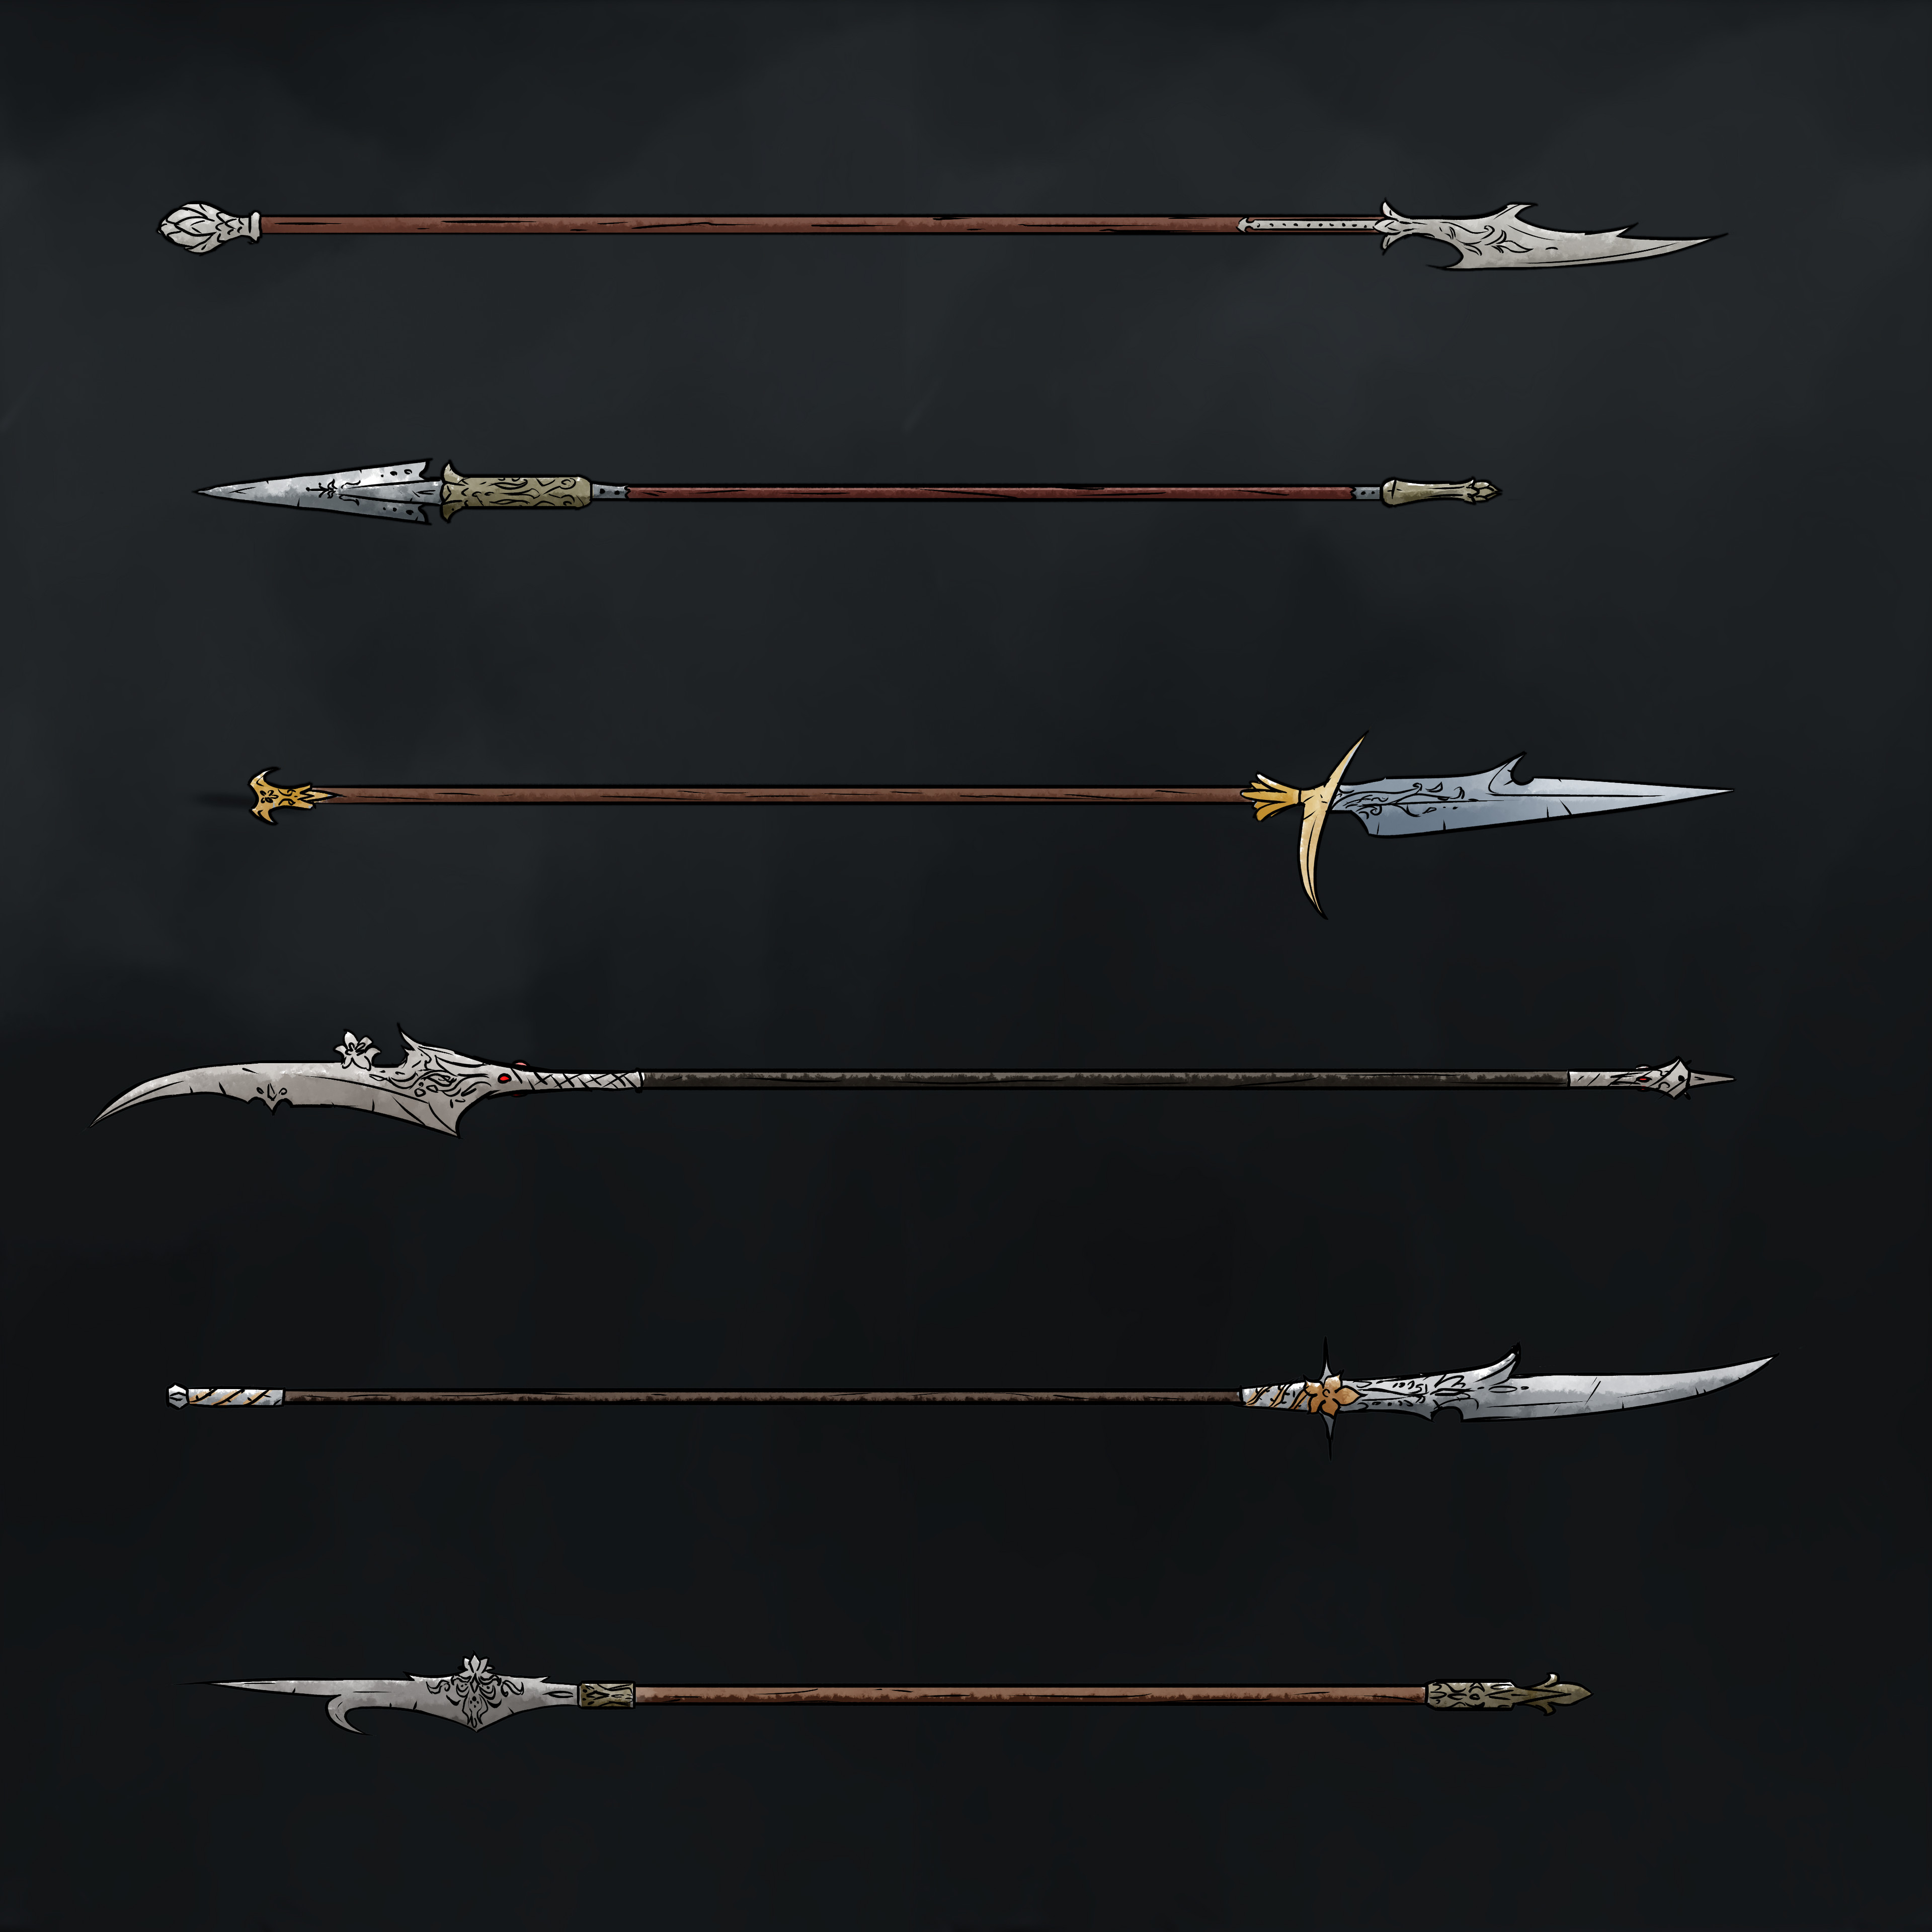 Warden Spear Concepts